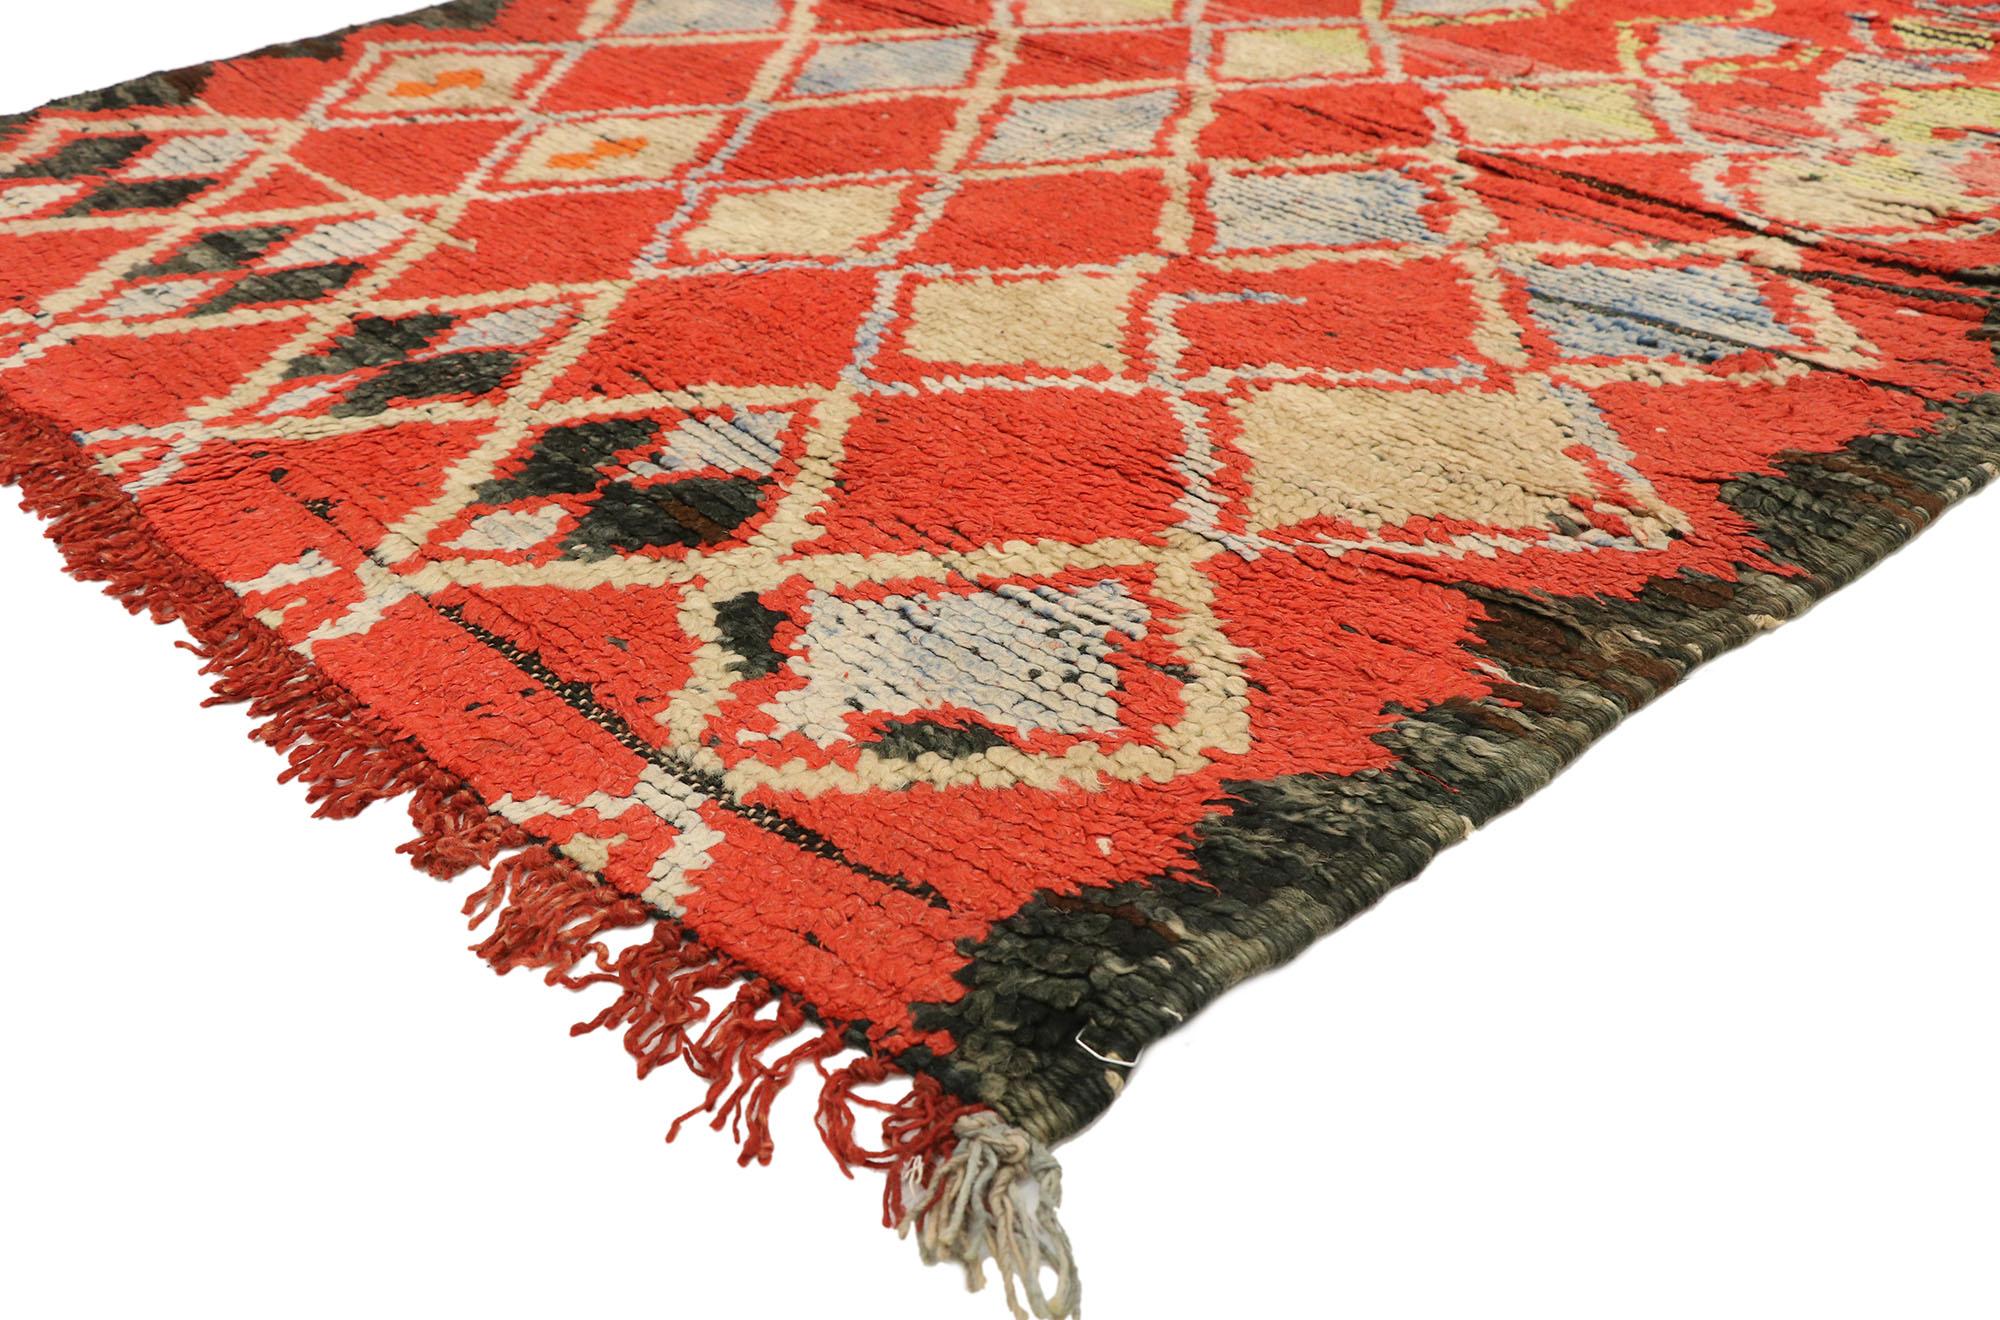 20233 Vintage Red Boujad Moroccan Rug, 04'04 x 07'04. Immerse yourself in the vibrant spirit woven into Boujad rugs, emerging from the bustling streets of Boujad in the Khouribga region. Crafted with expert skill by Berber tribes, notably the Haouz